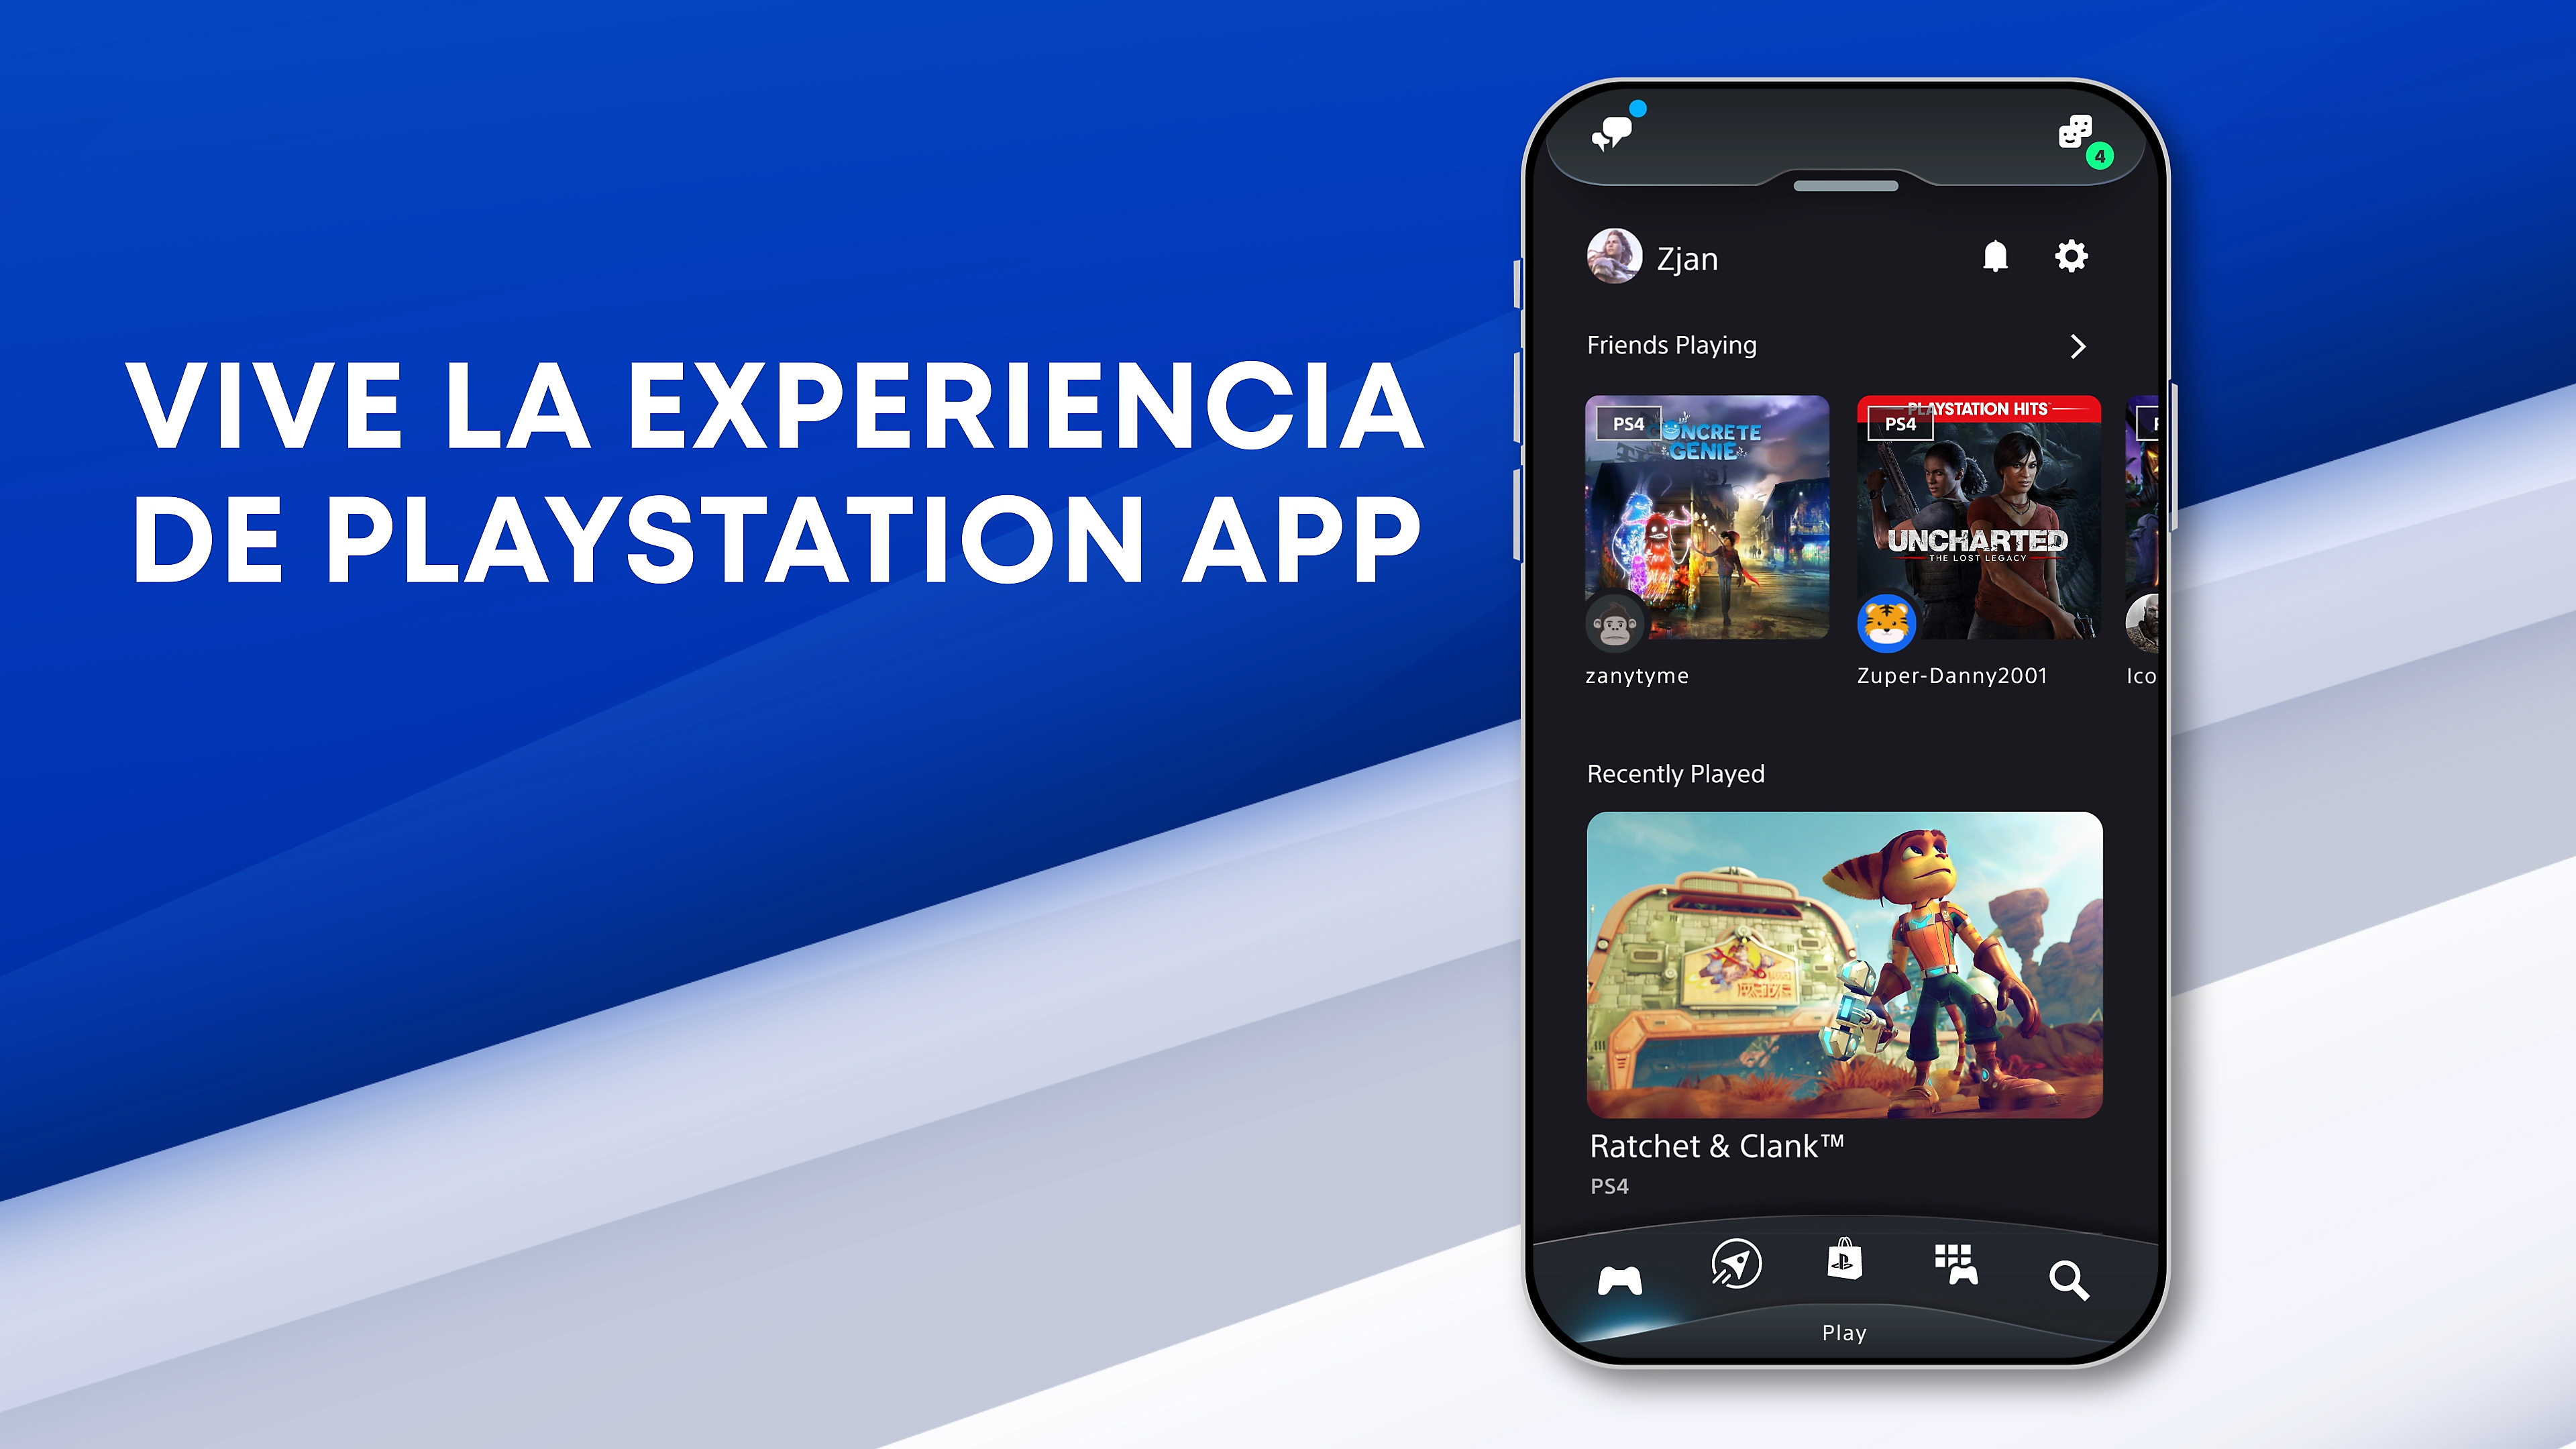 Introducing the new PlayStation App